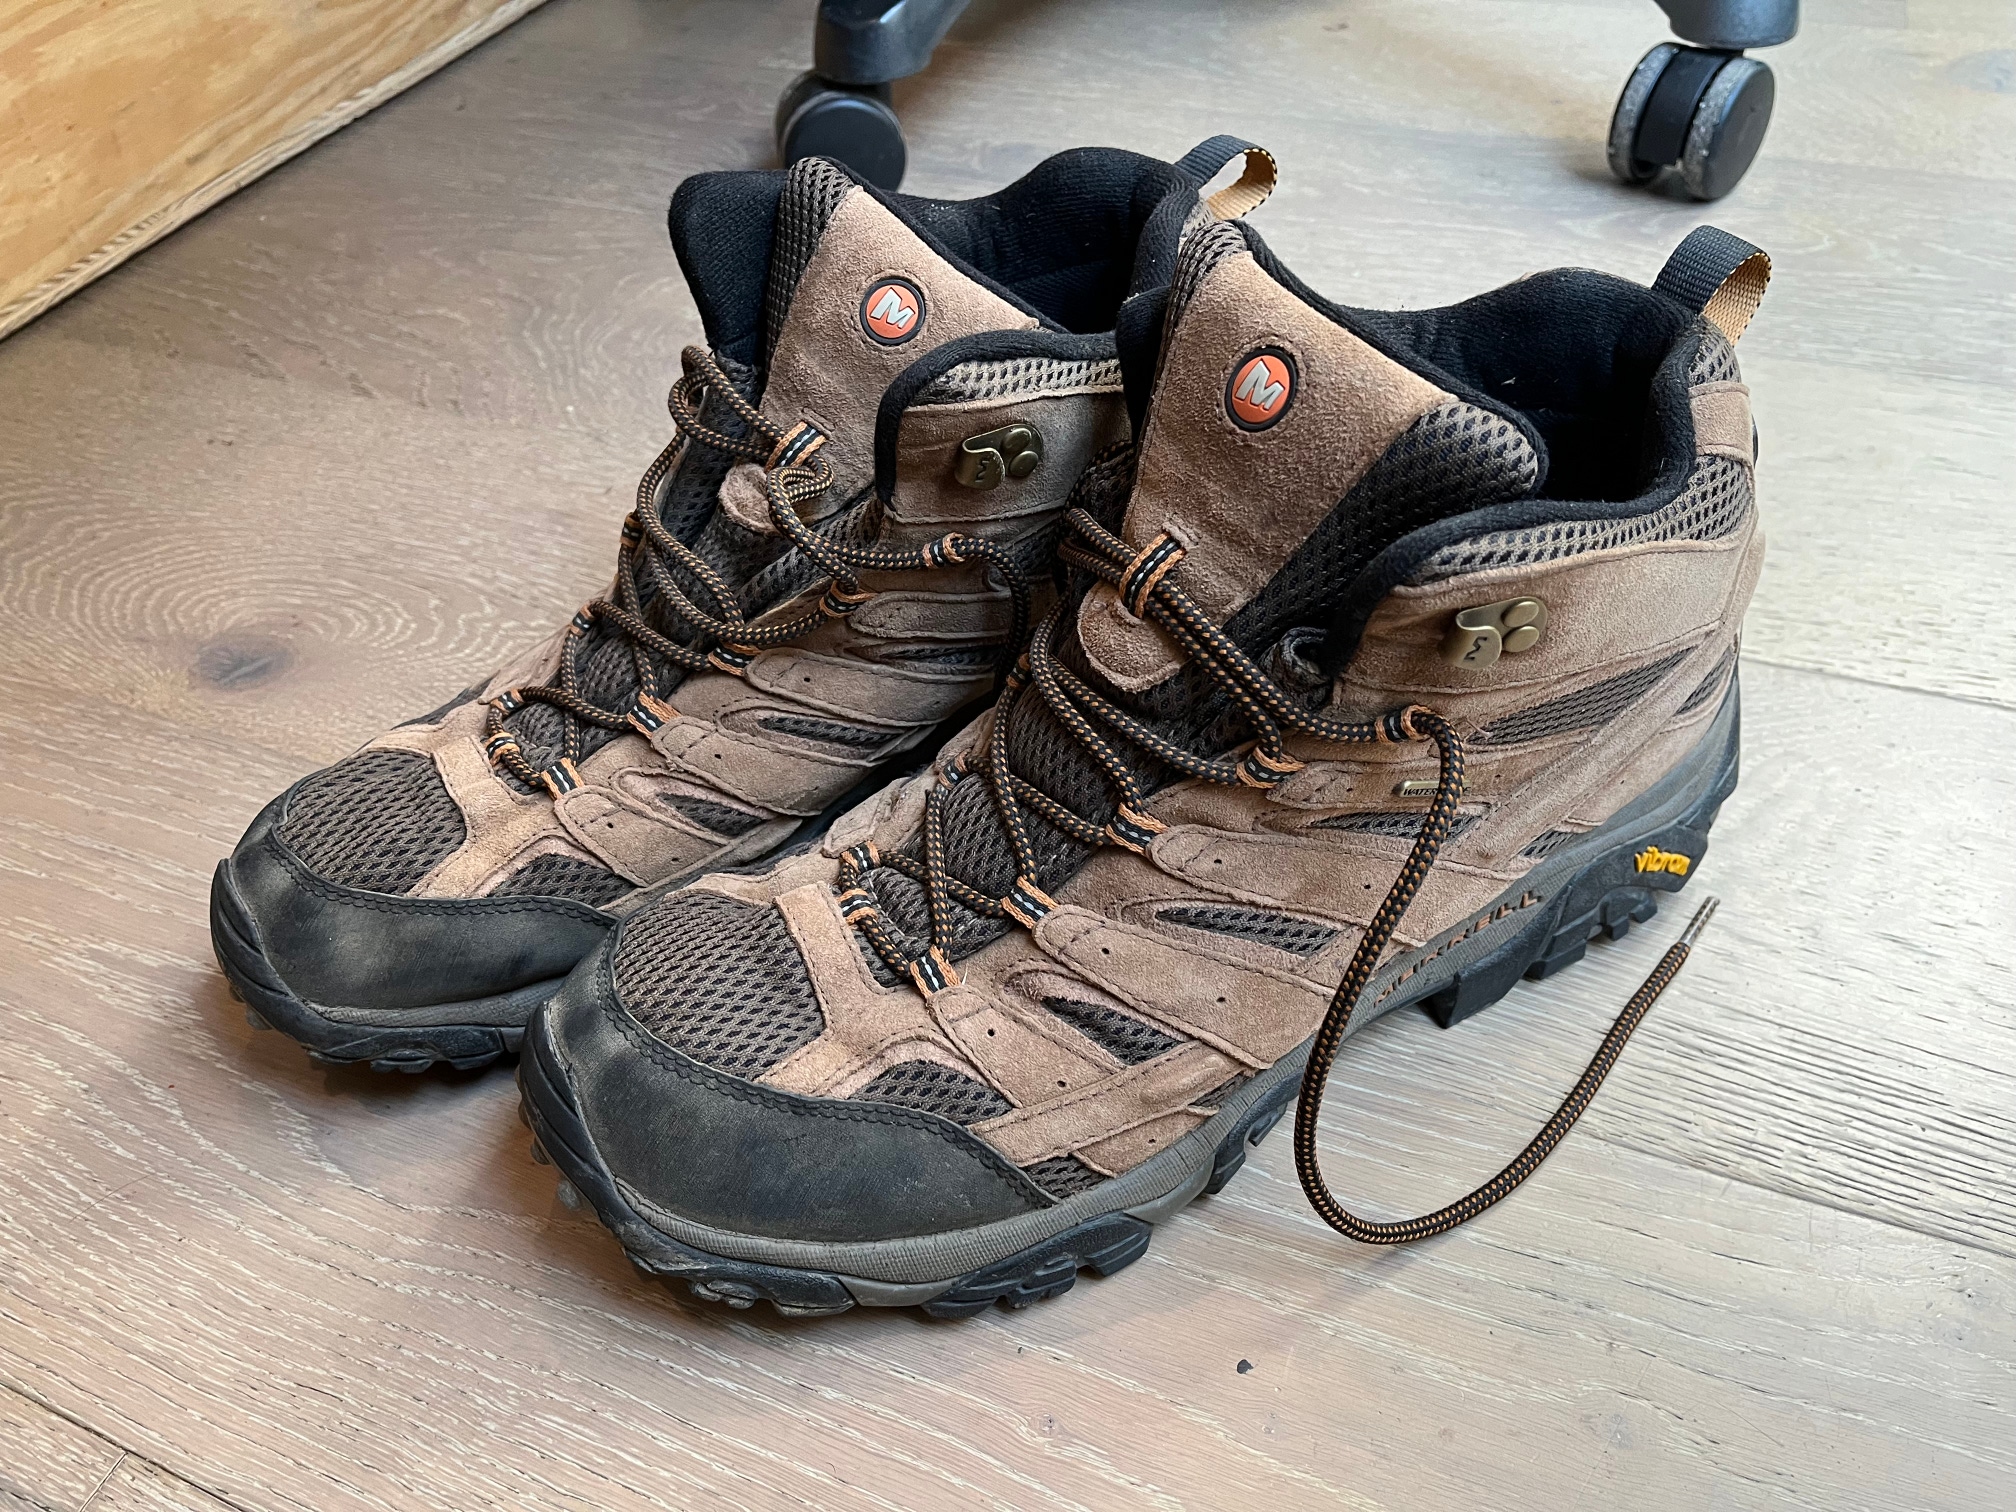 Used Men's Size 14 (Women's 15) Hiking Boots